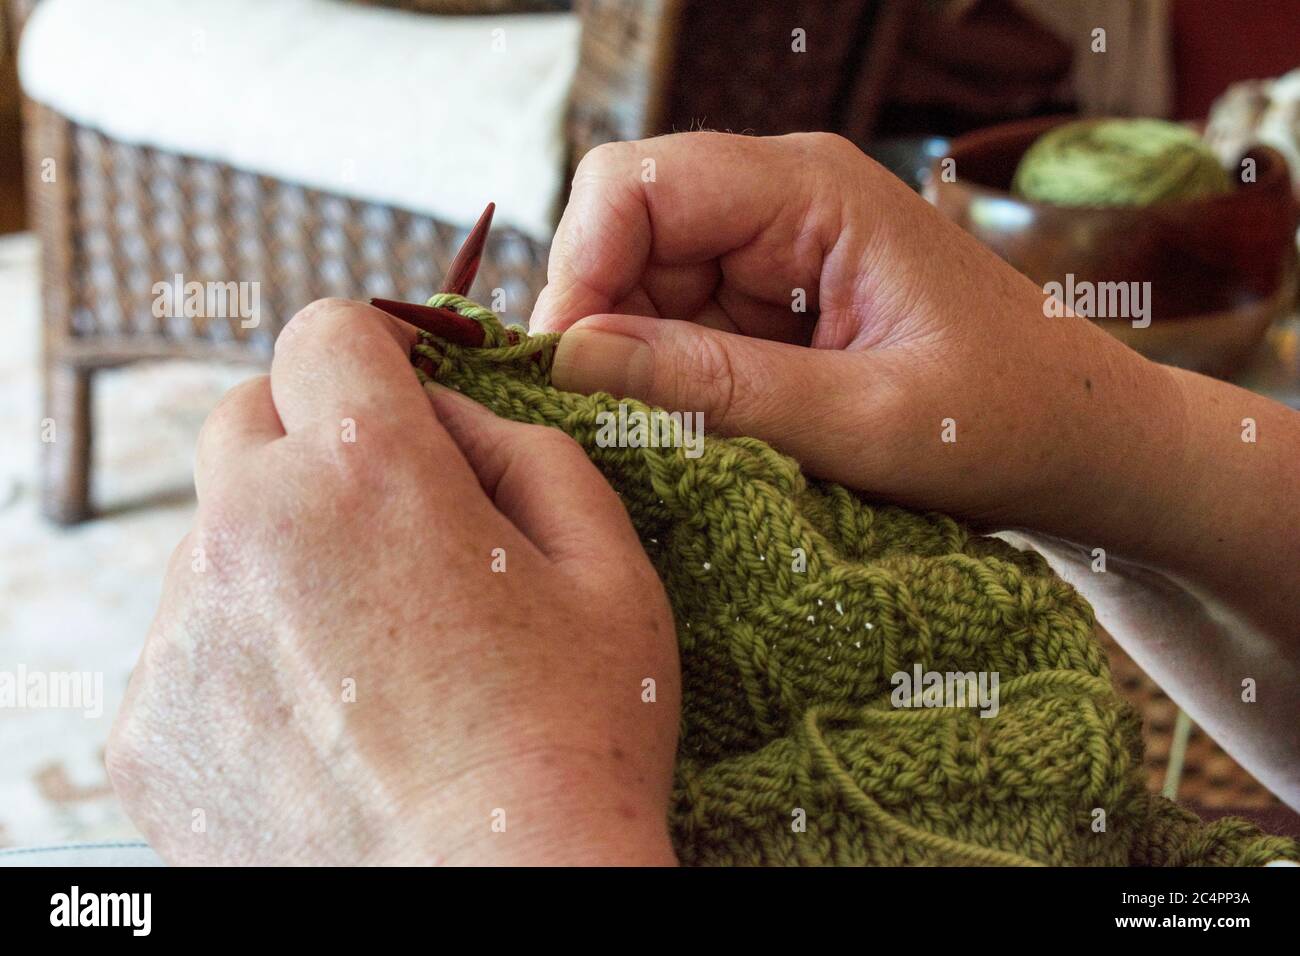 Stitches Clothing High Resolution Stock Photography and Images - Alamy